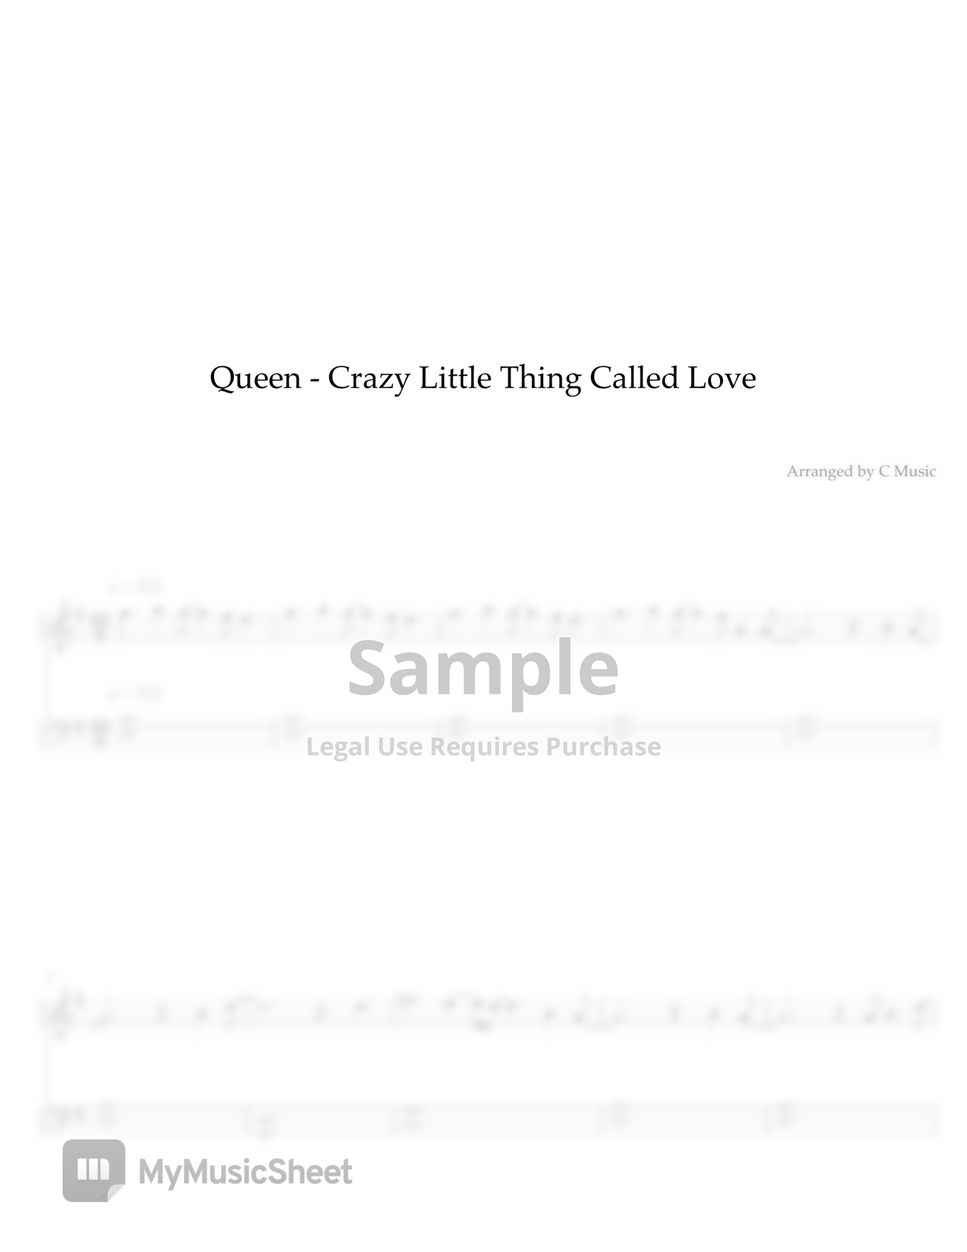 Queen - Crazy Little Thing Called Love (Easy Version) by C Music